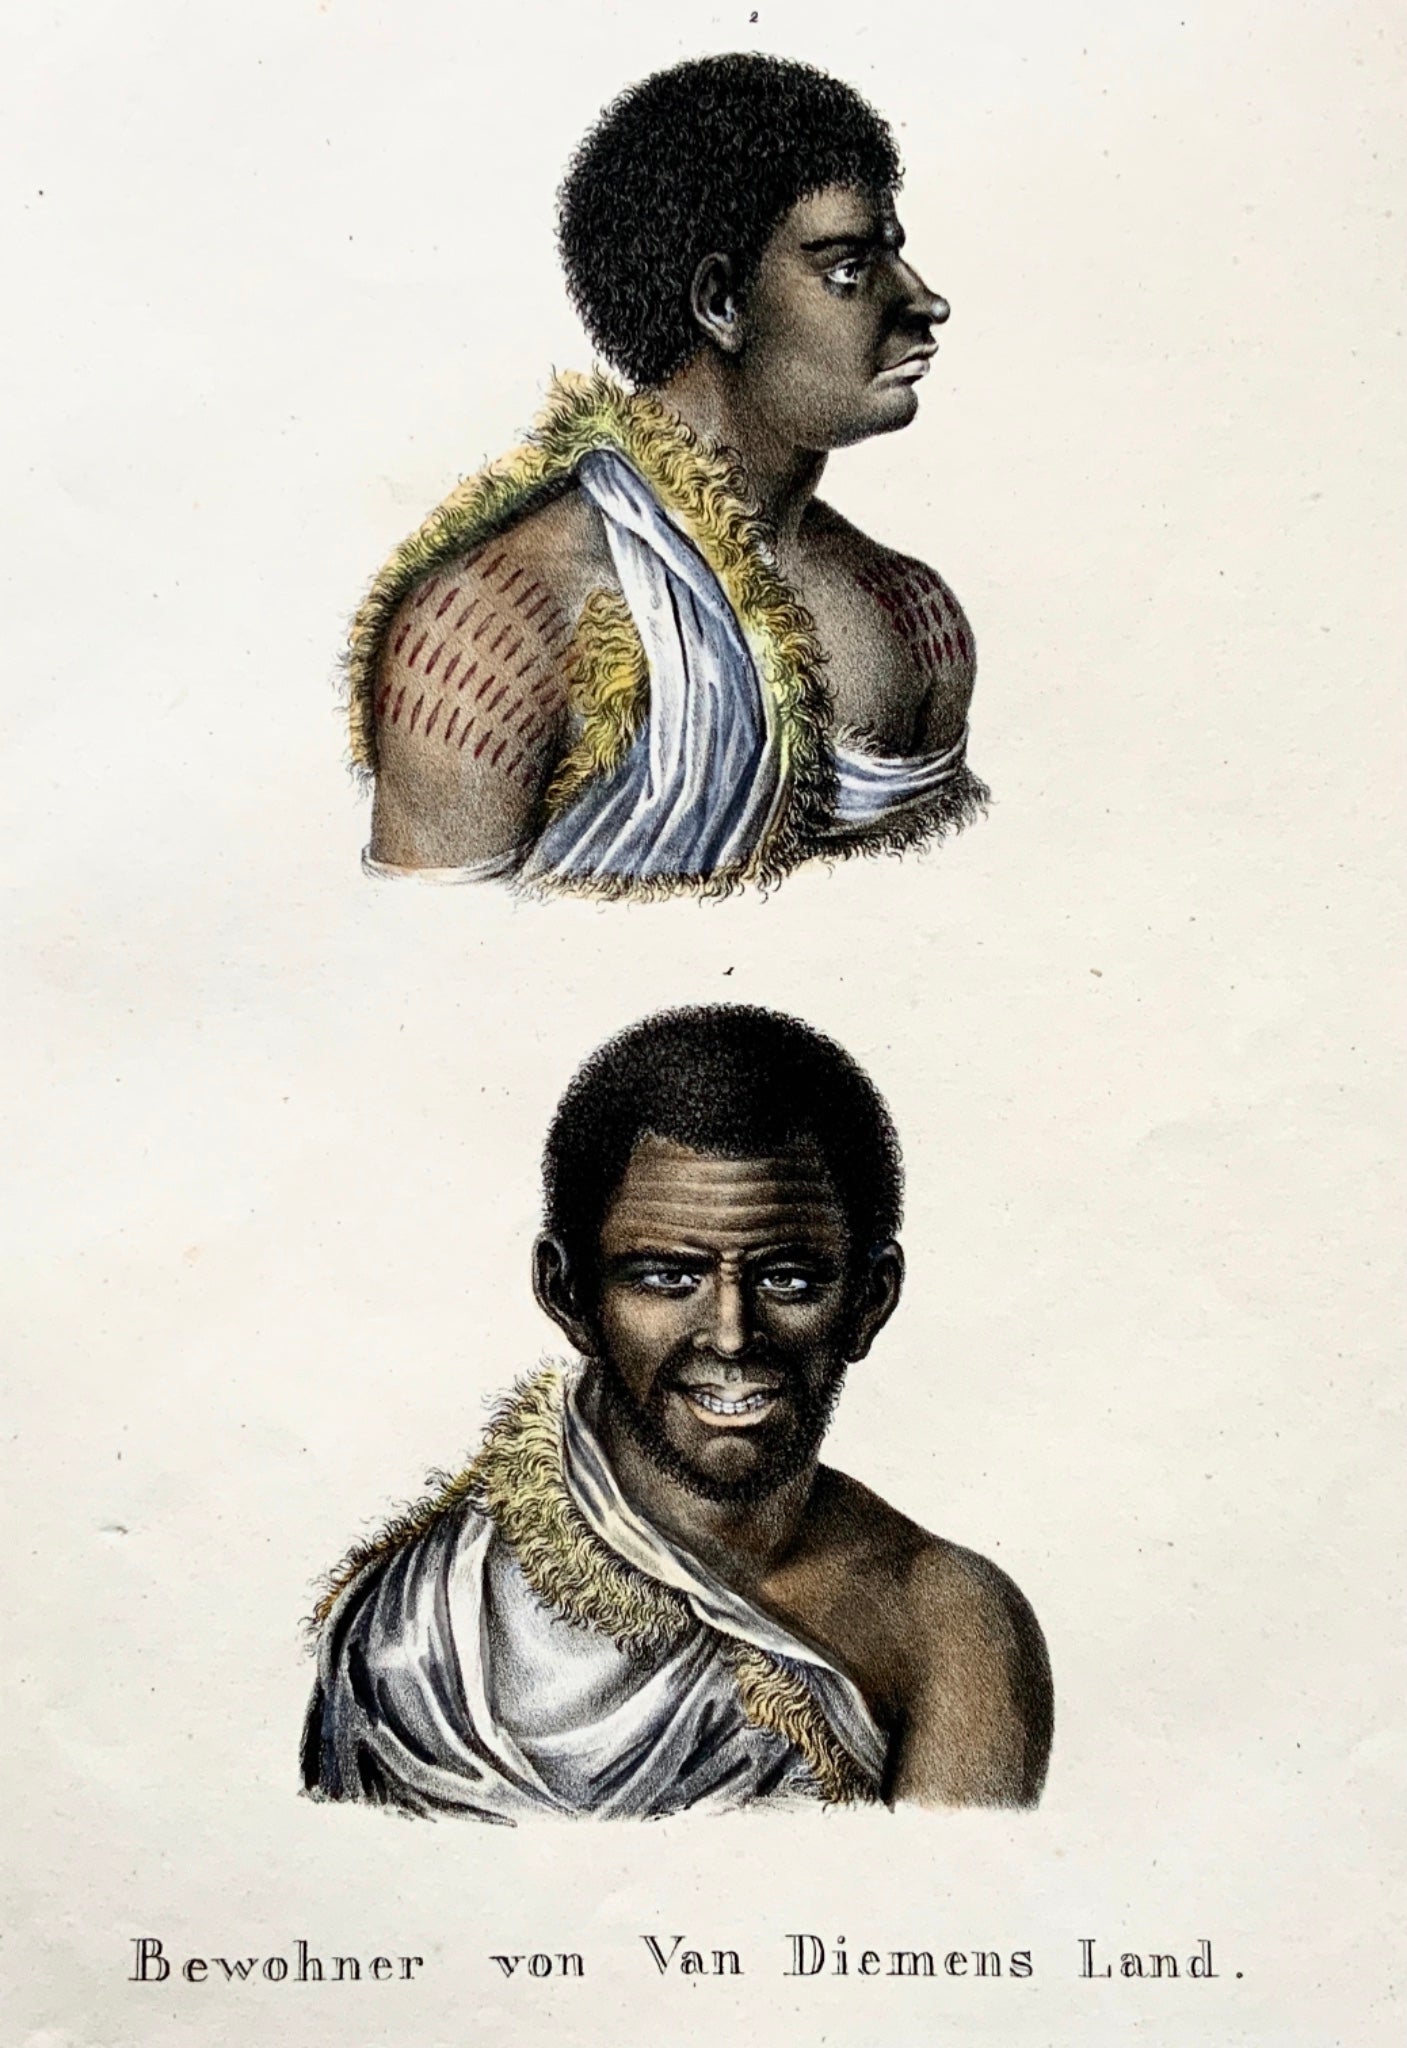 1824 Natives of TASMANIA - K.J. Brodtmann hand colored FOLIO stone lithography - Ethnology